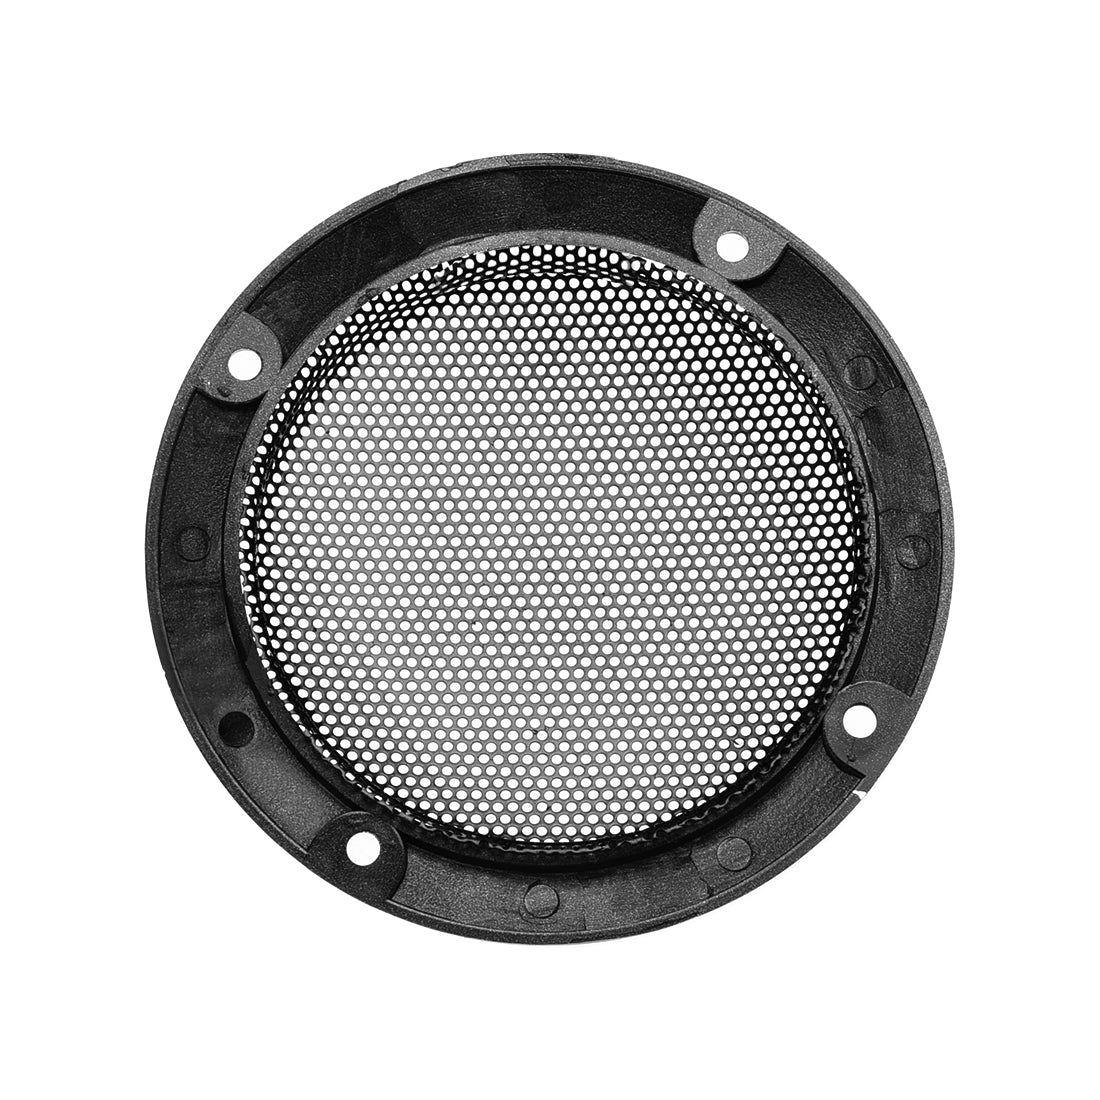 uxcell Uxcell Speaker Grill Cover 2 Inch Mesh Decorative Circle Subwoofer Guard Protector Black